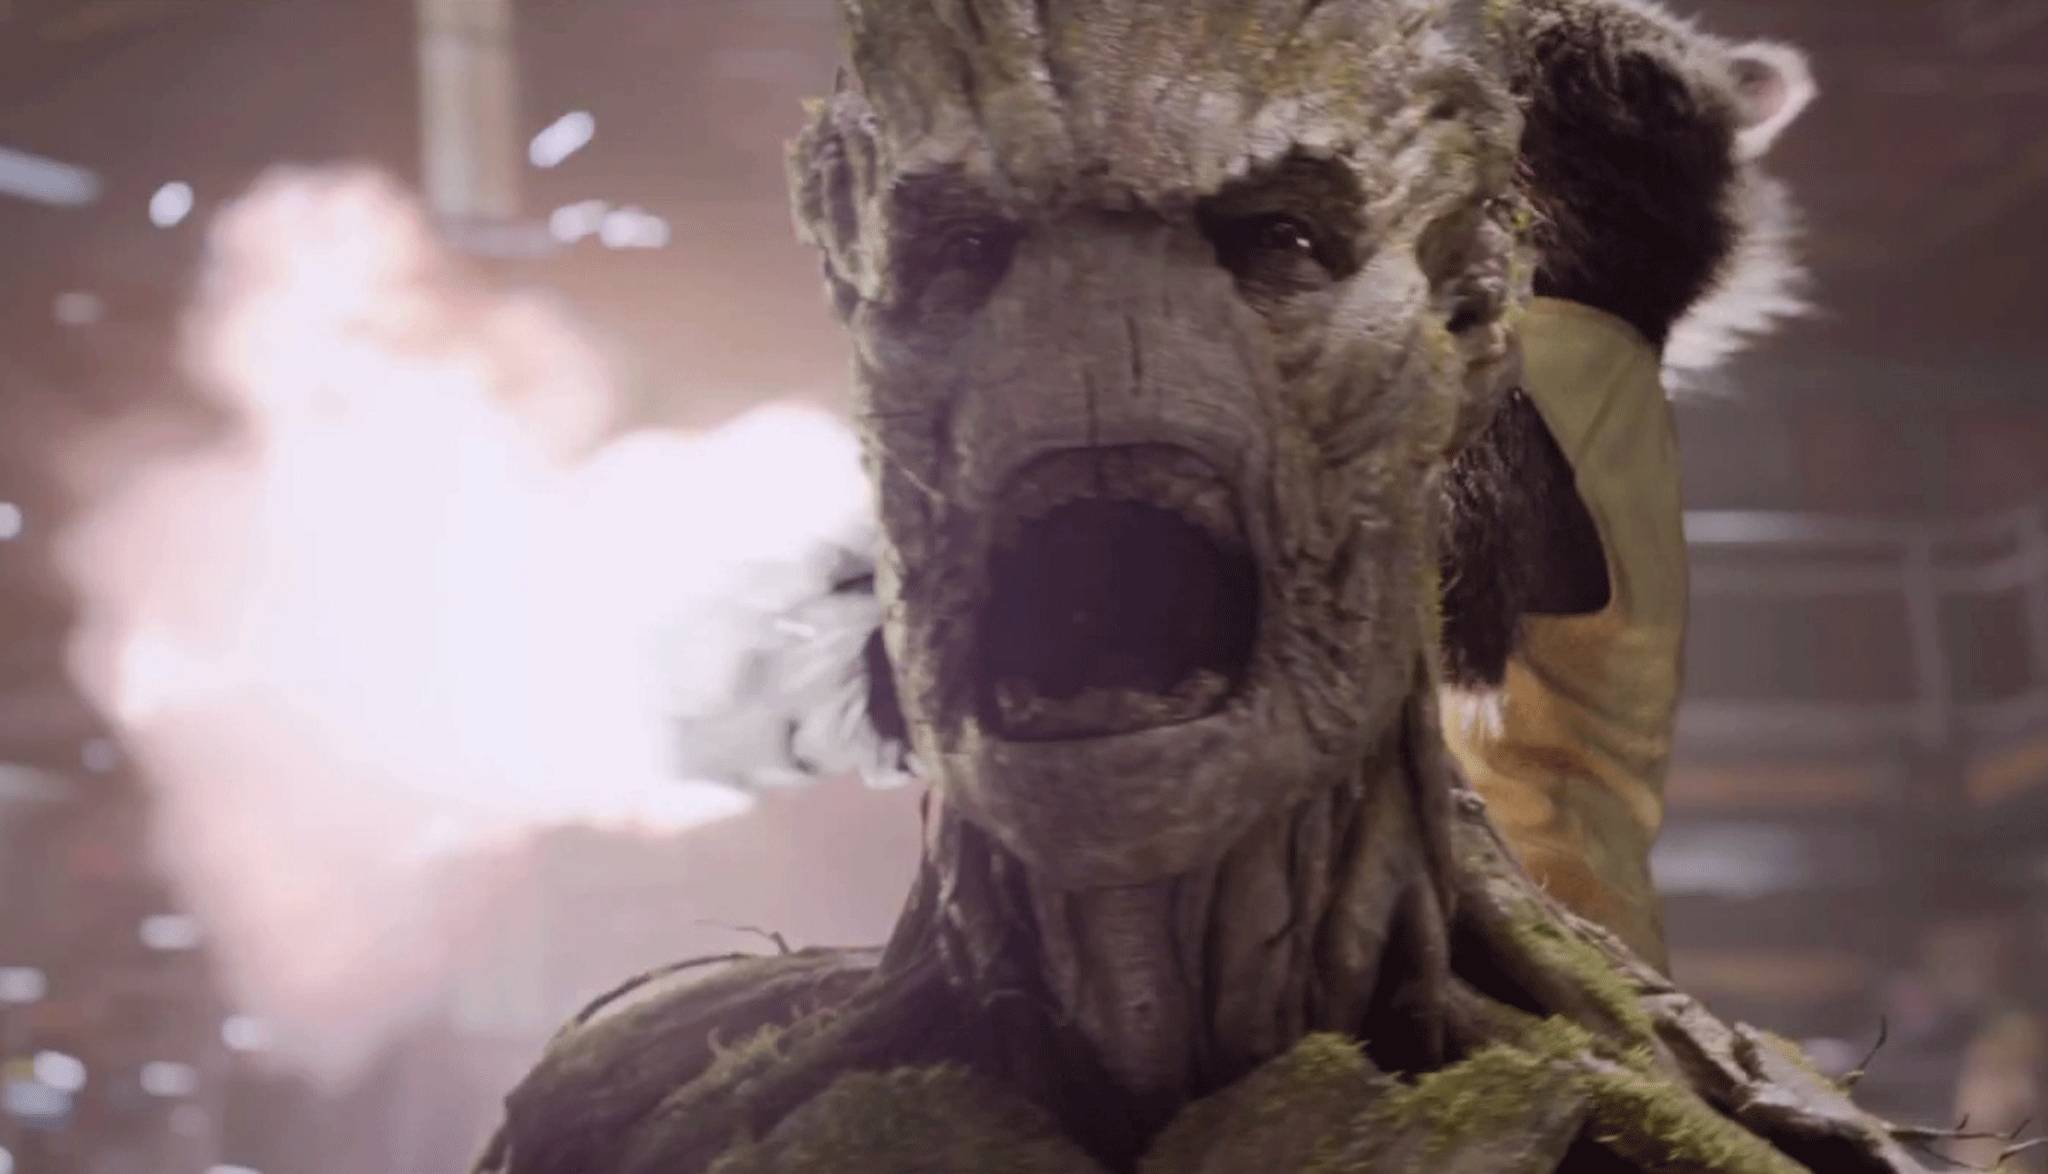 A still from the Guardians of the Galaxy teaser trailer